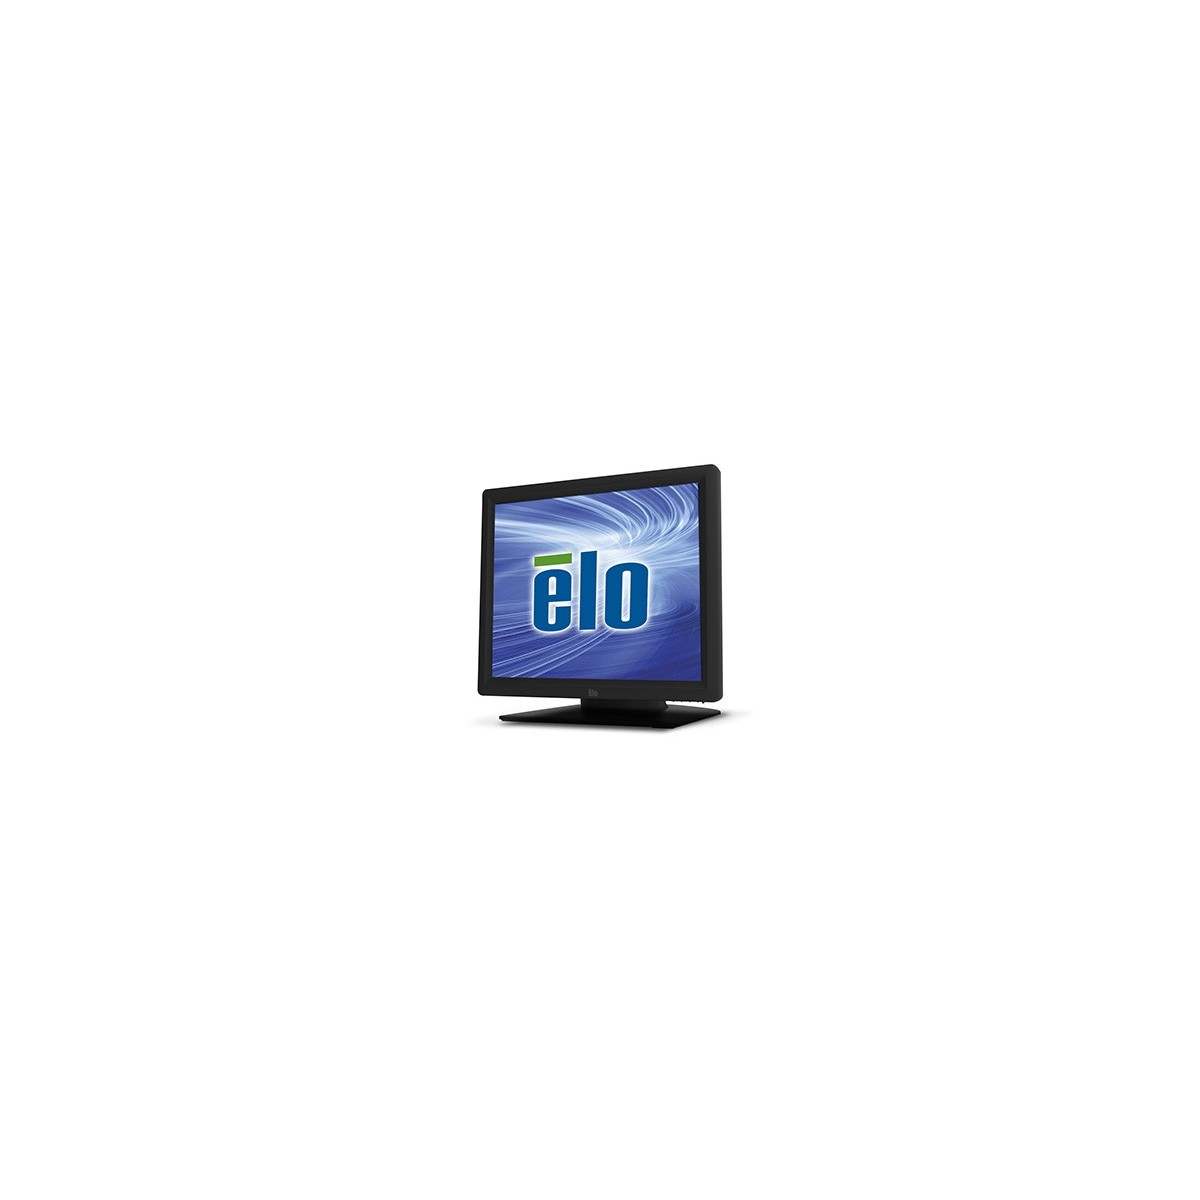 Elo Touch Solutions Elo Touch Solution 1517L Rev B - 38.1 cm (15") - 225 cd-m² - 4:3 - 1024 x 768 pixels - LCD - 4:3